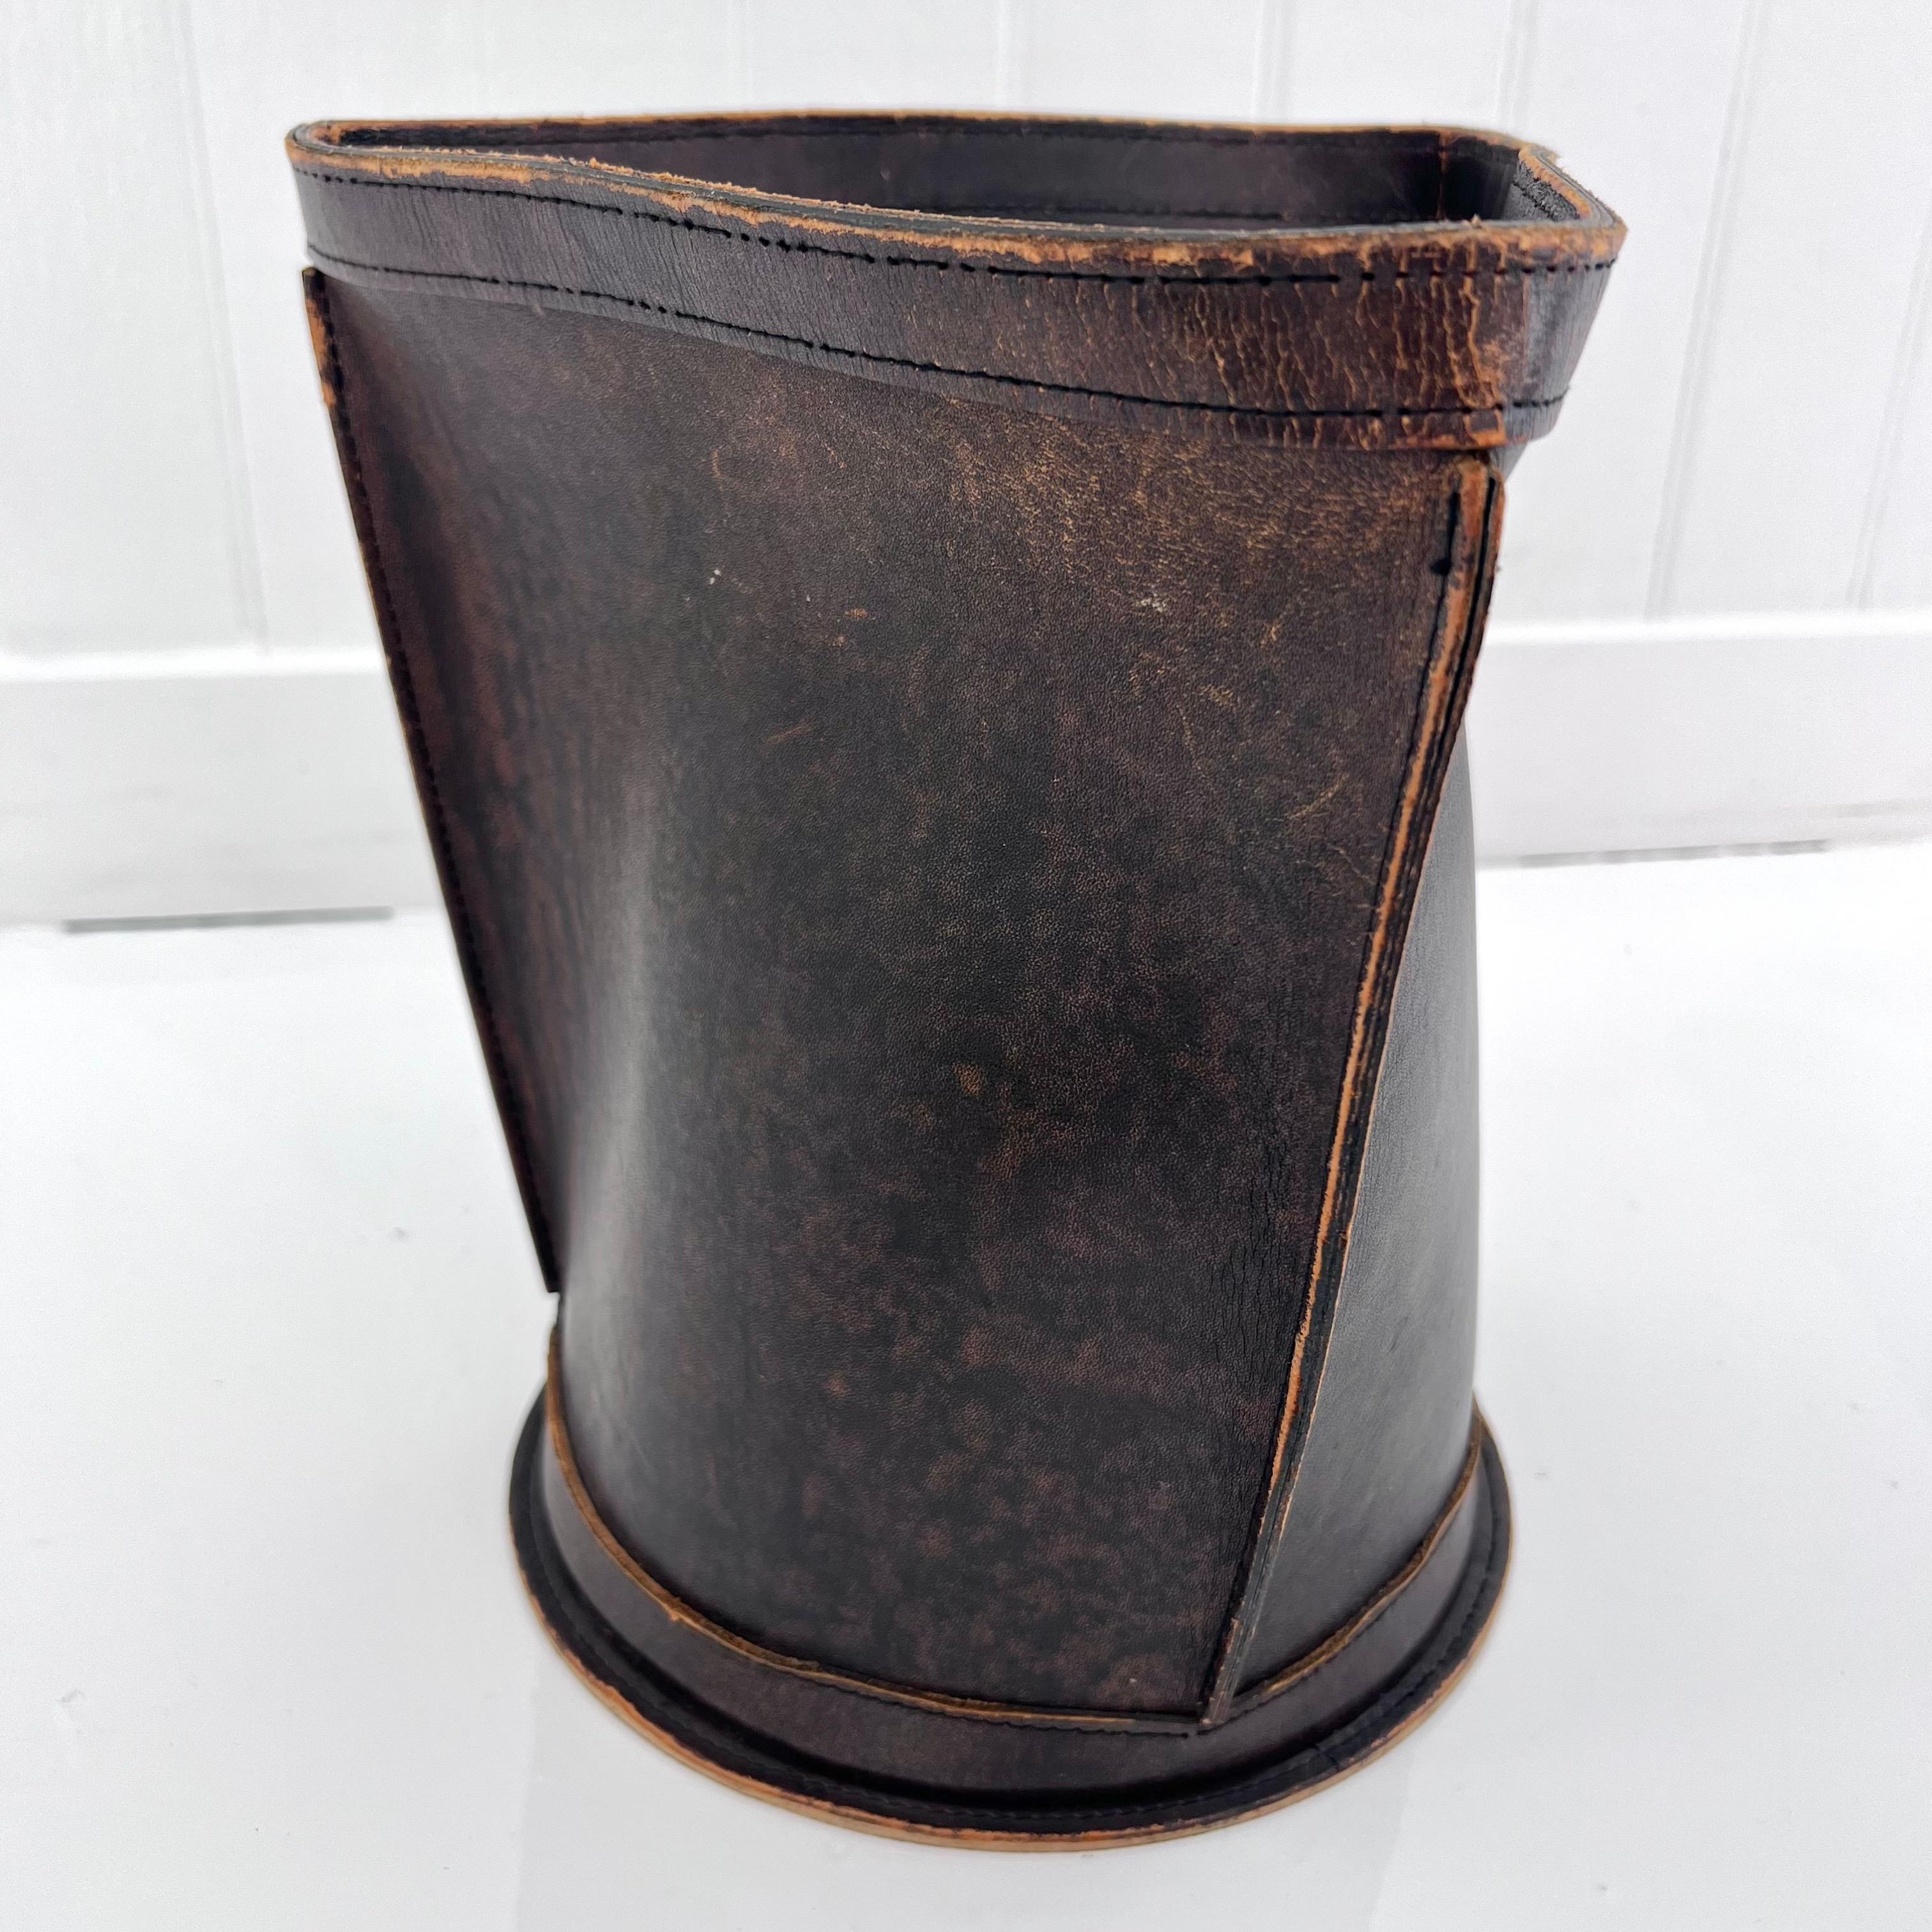 Beautiful distressed leather waste bin. Fully made of a thick cowhide leather with the upper stitched in a triangular shape and fastened onto a circular base giving it great lines. Great rich brown color with tan brown undertones. High quality